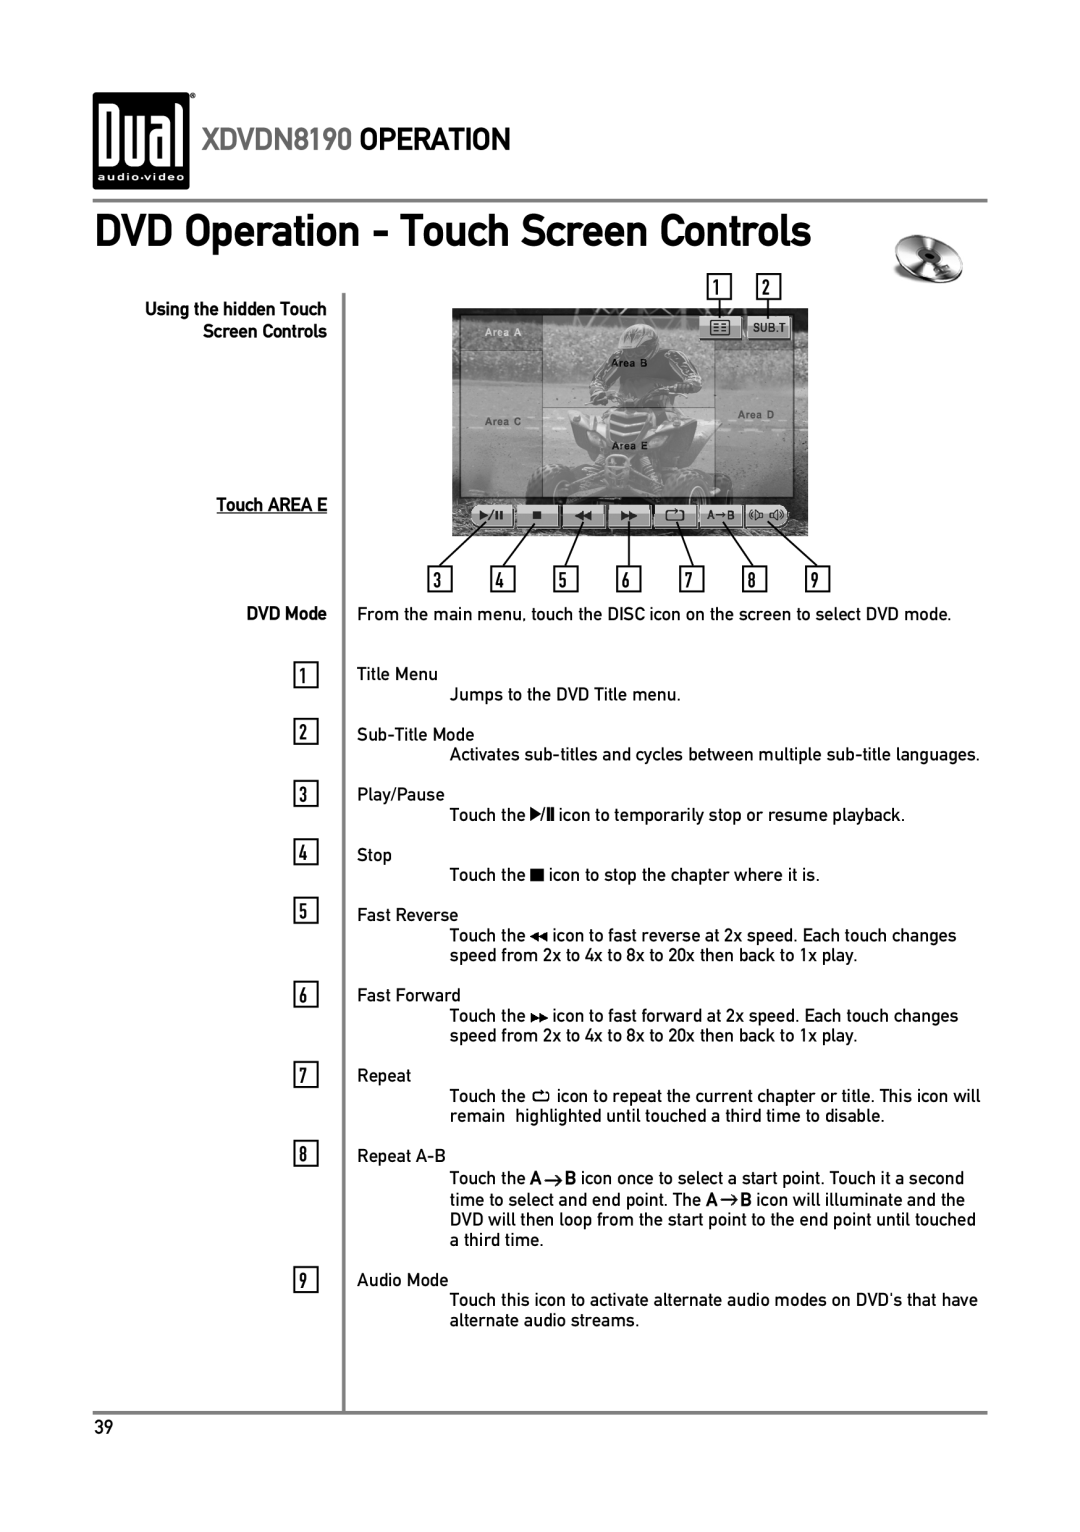 Dual owner manual DVD Operation - Touch Screen Controls, XDVDN8190 OPERATION, Touch AREA E DVD Mode 